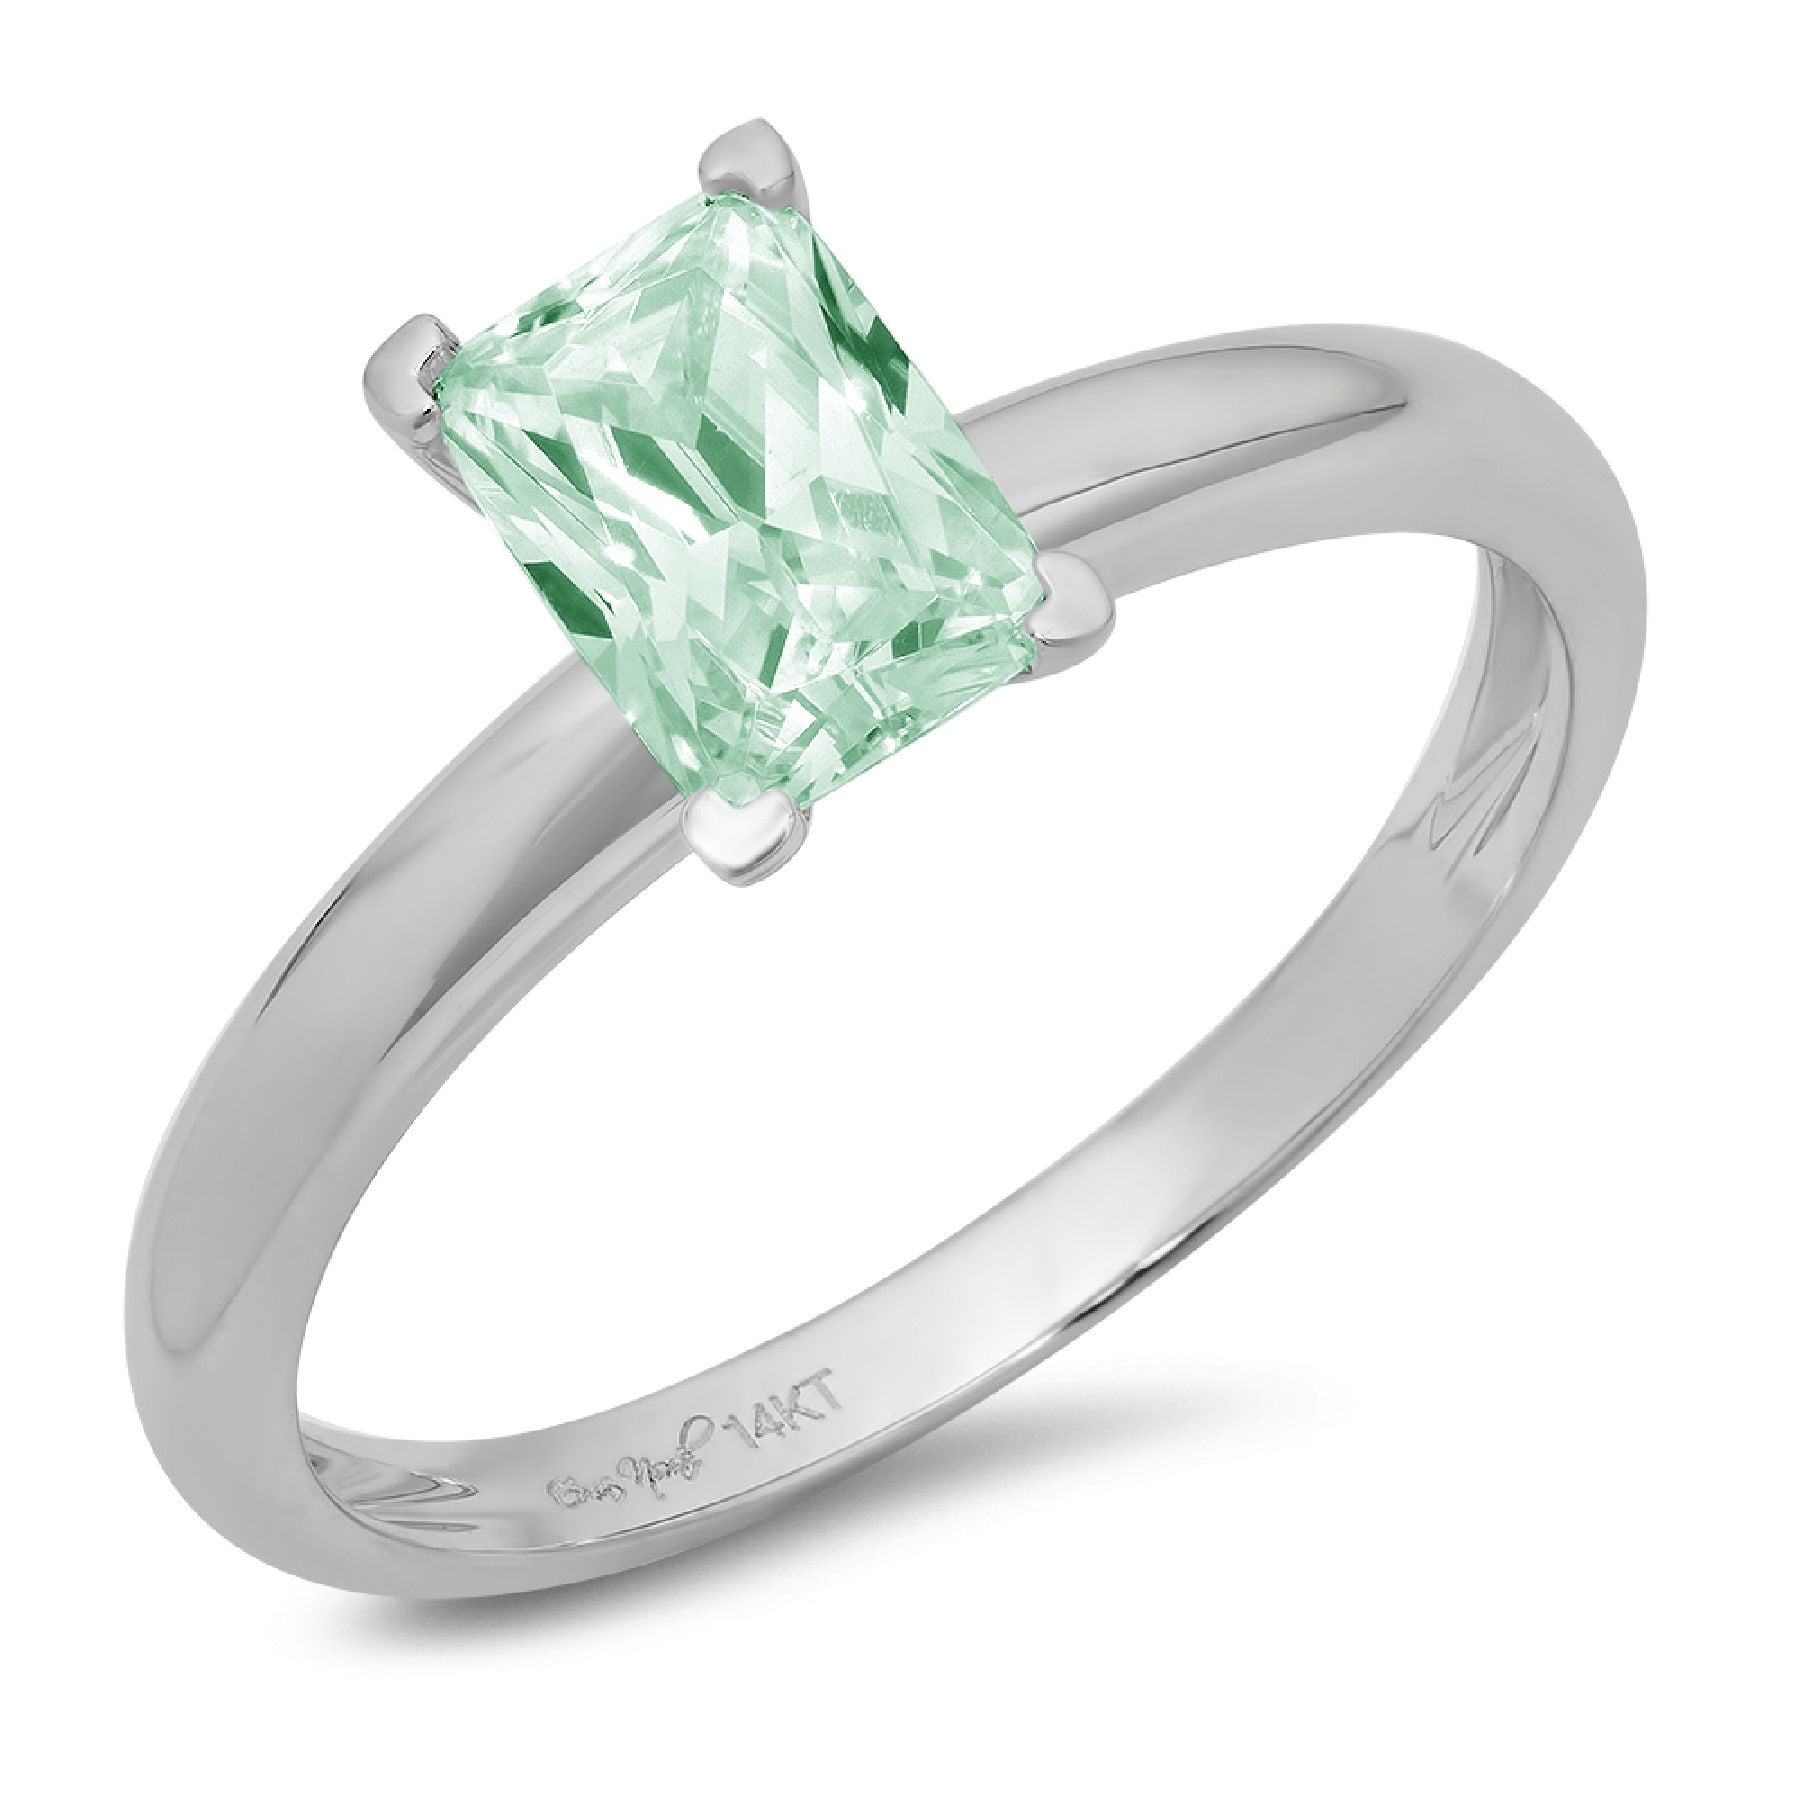 Details about   2Ct Cushion Cut Green Emerald Solitaire Engagement Ring 14K Yellow Gold Finish 